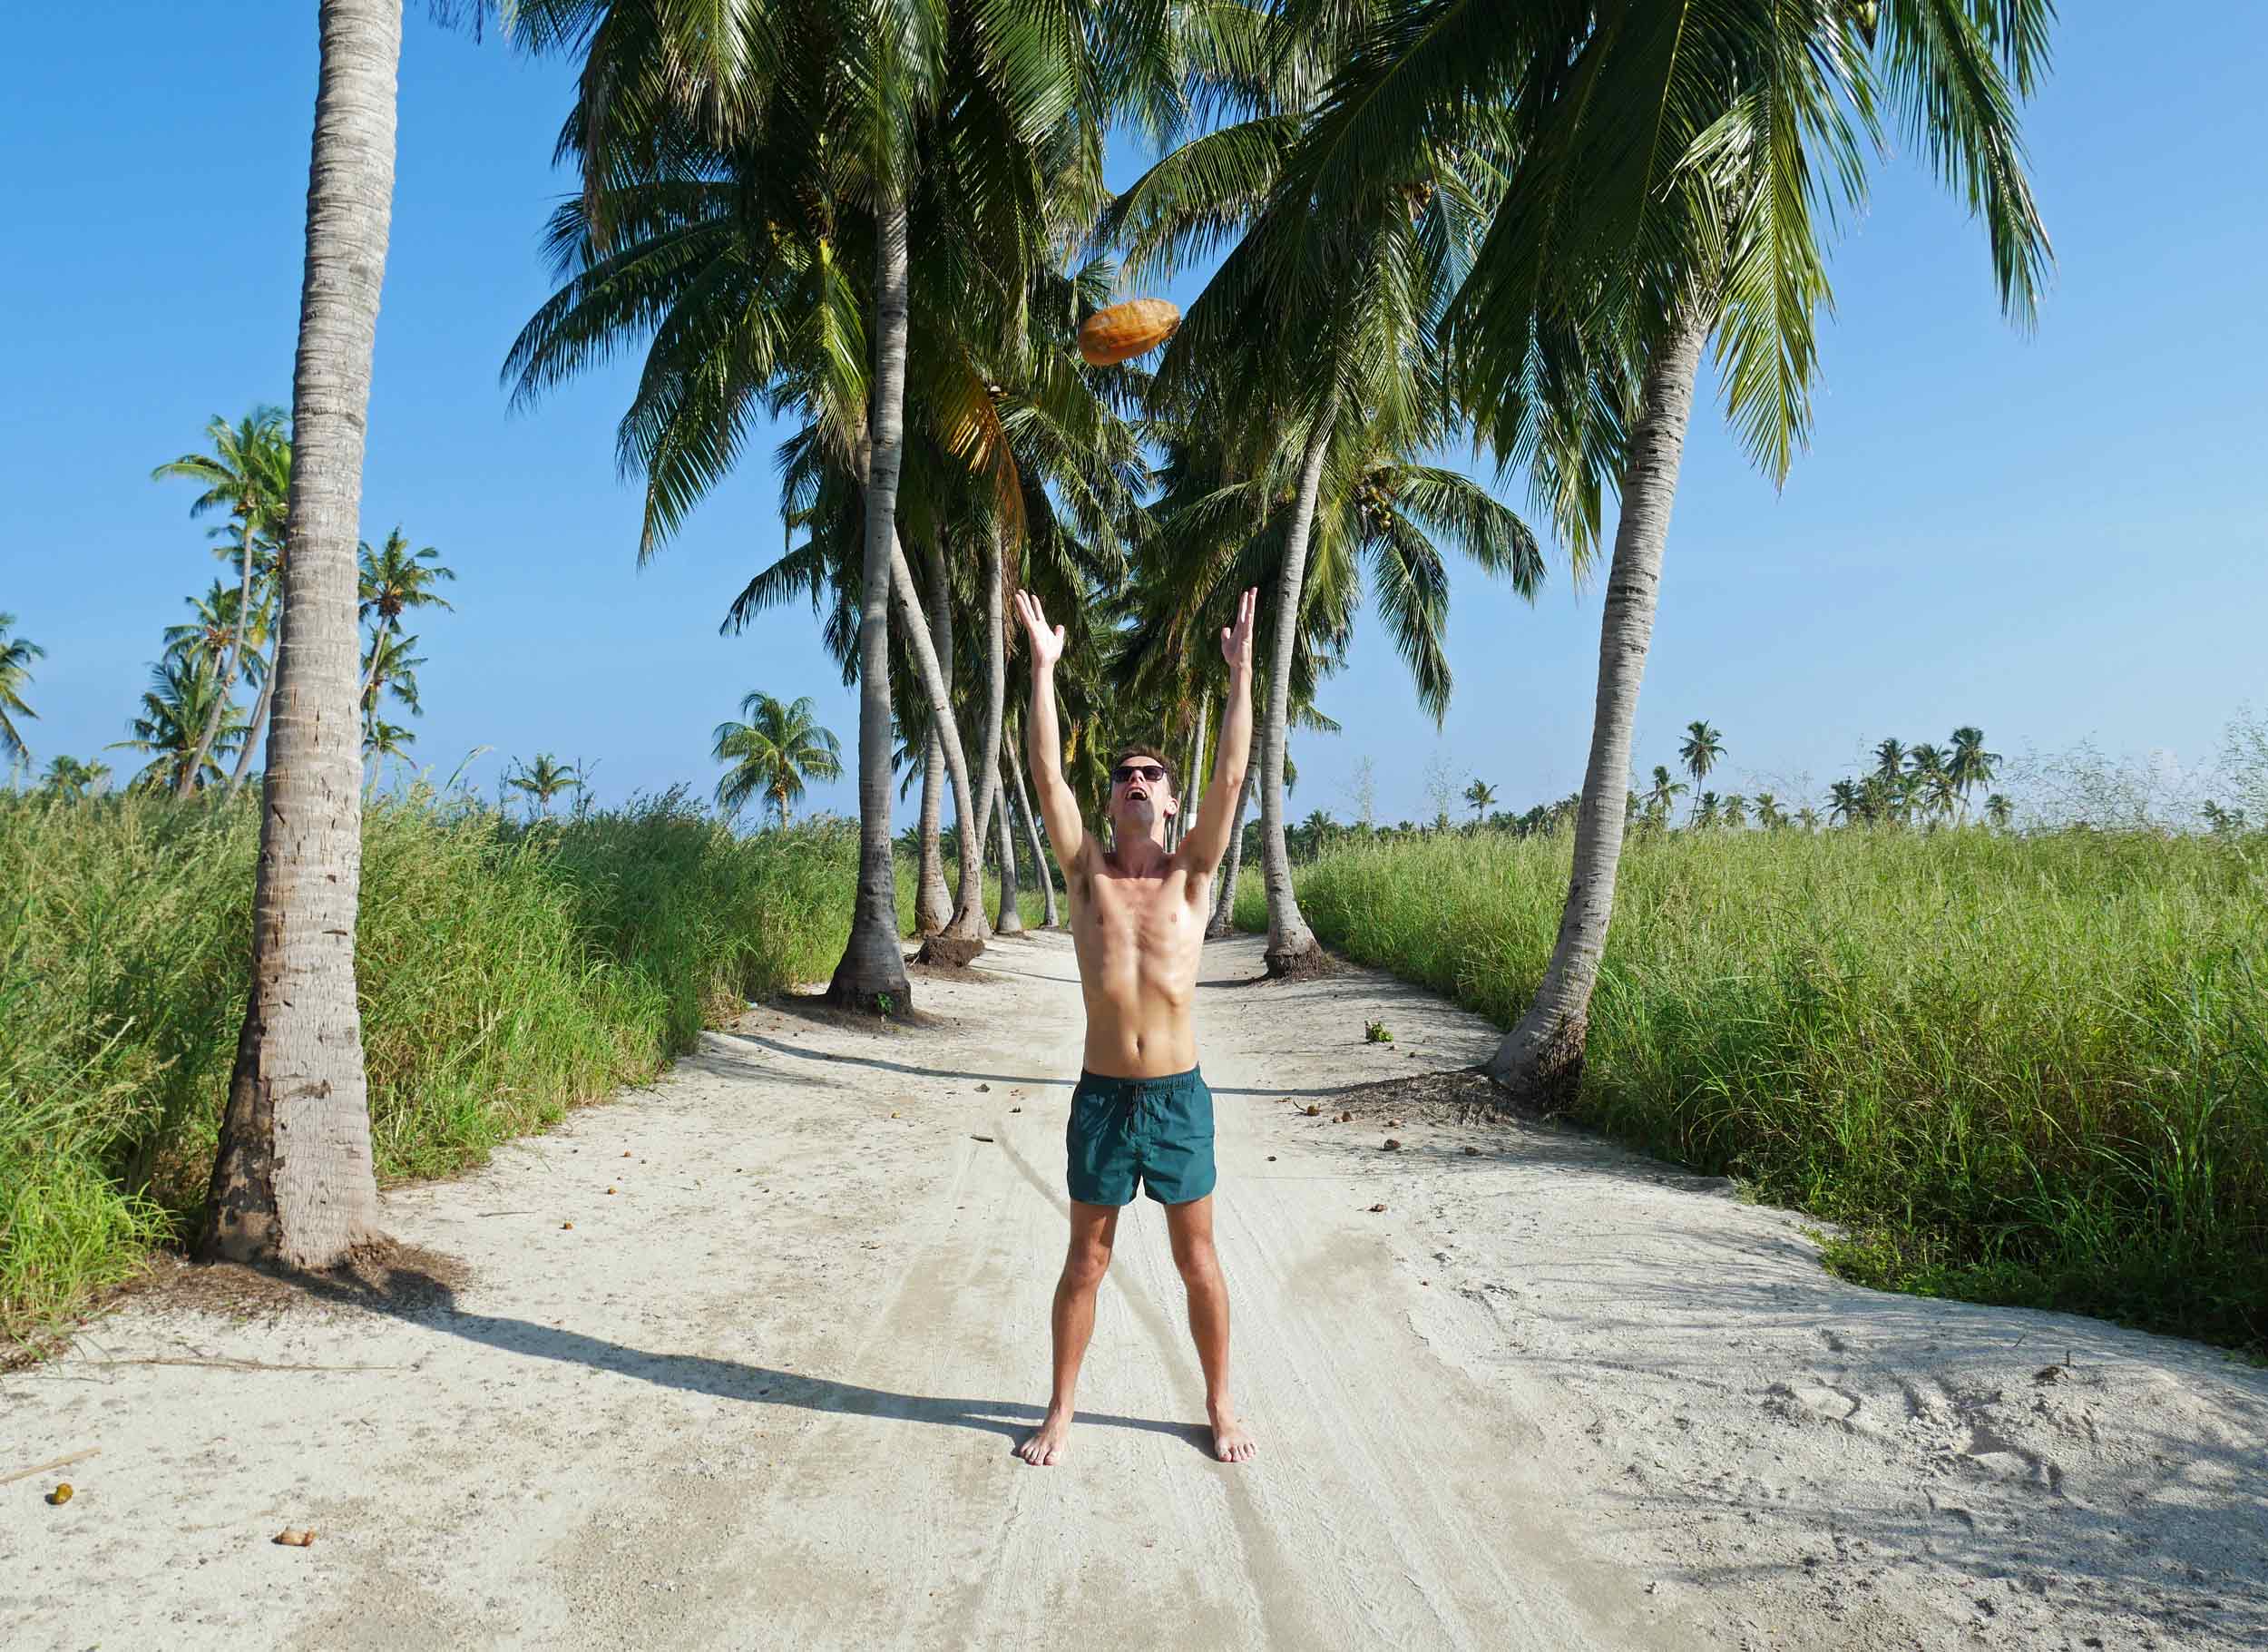  Watch out for falling coconuts! 